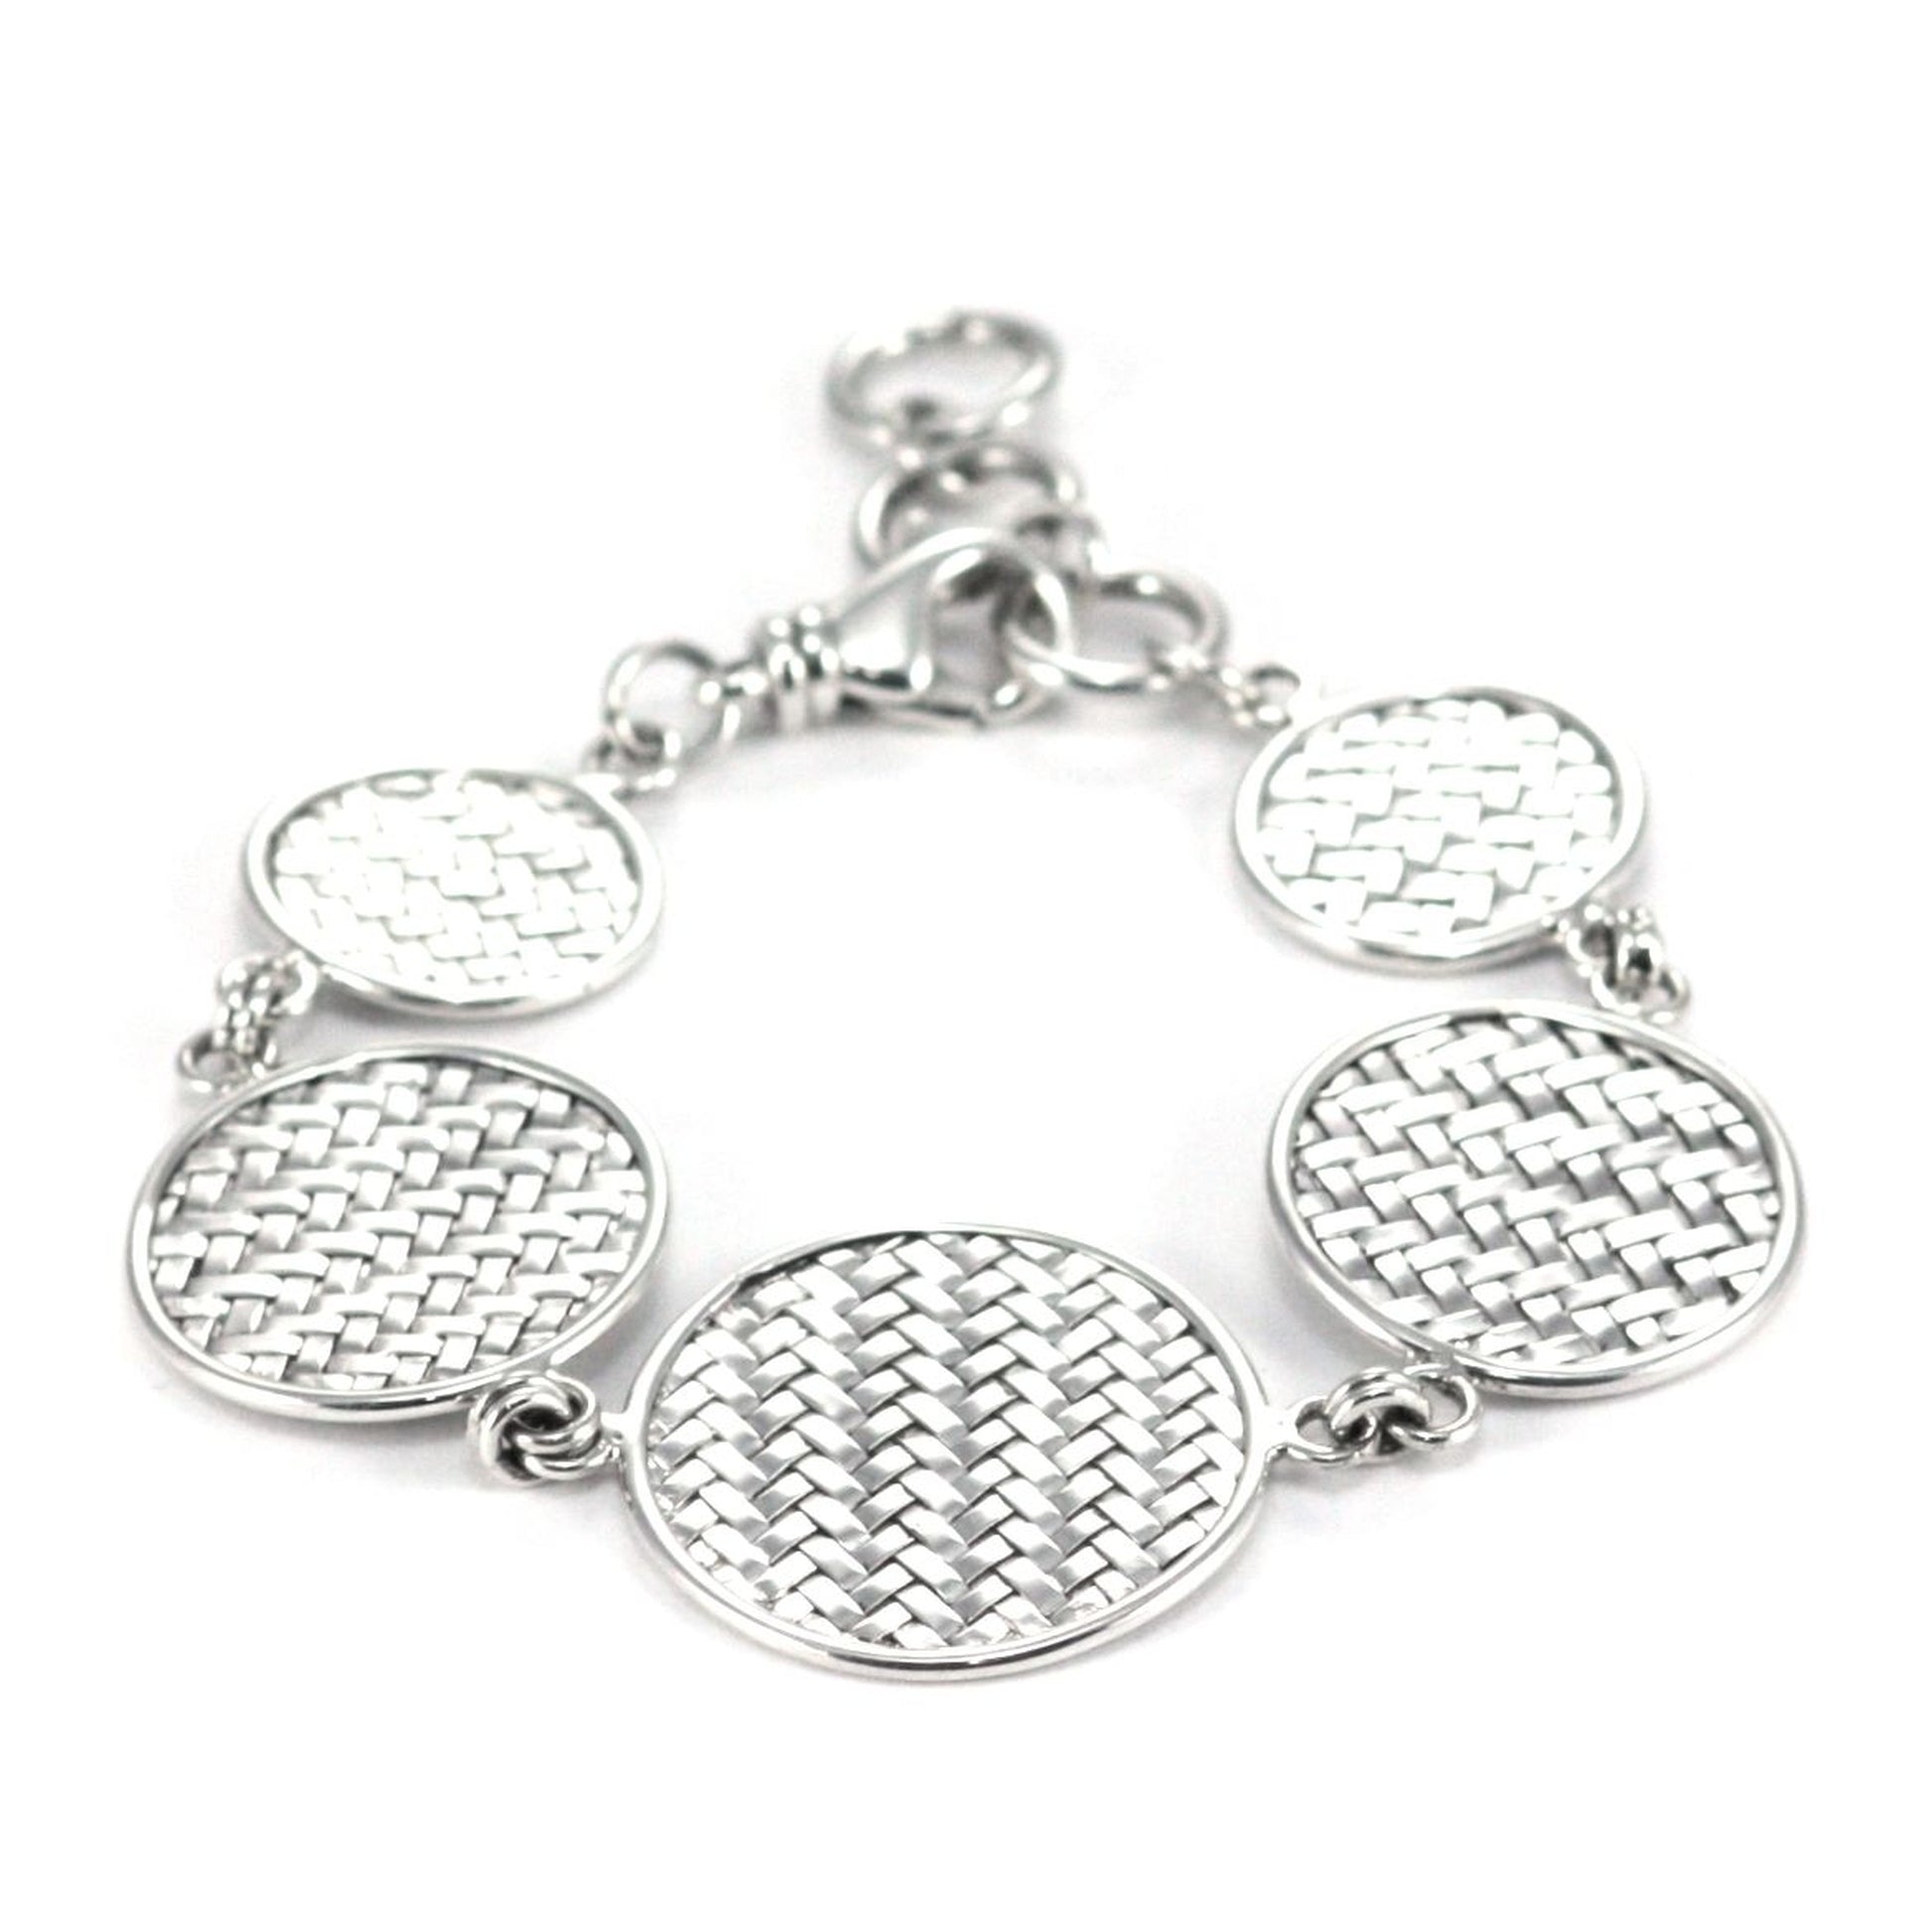 Silver bracelet made of five round woven discs of varying sizes.